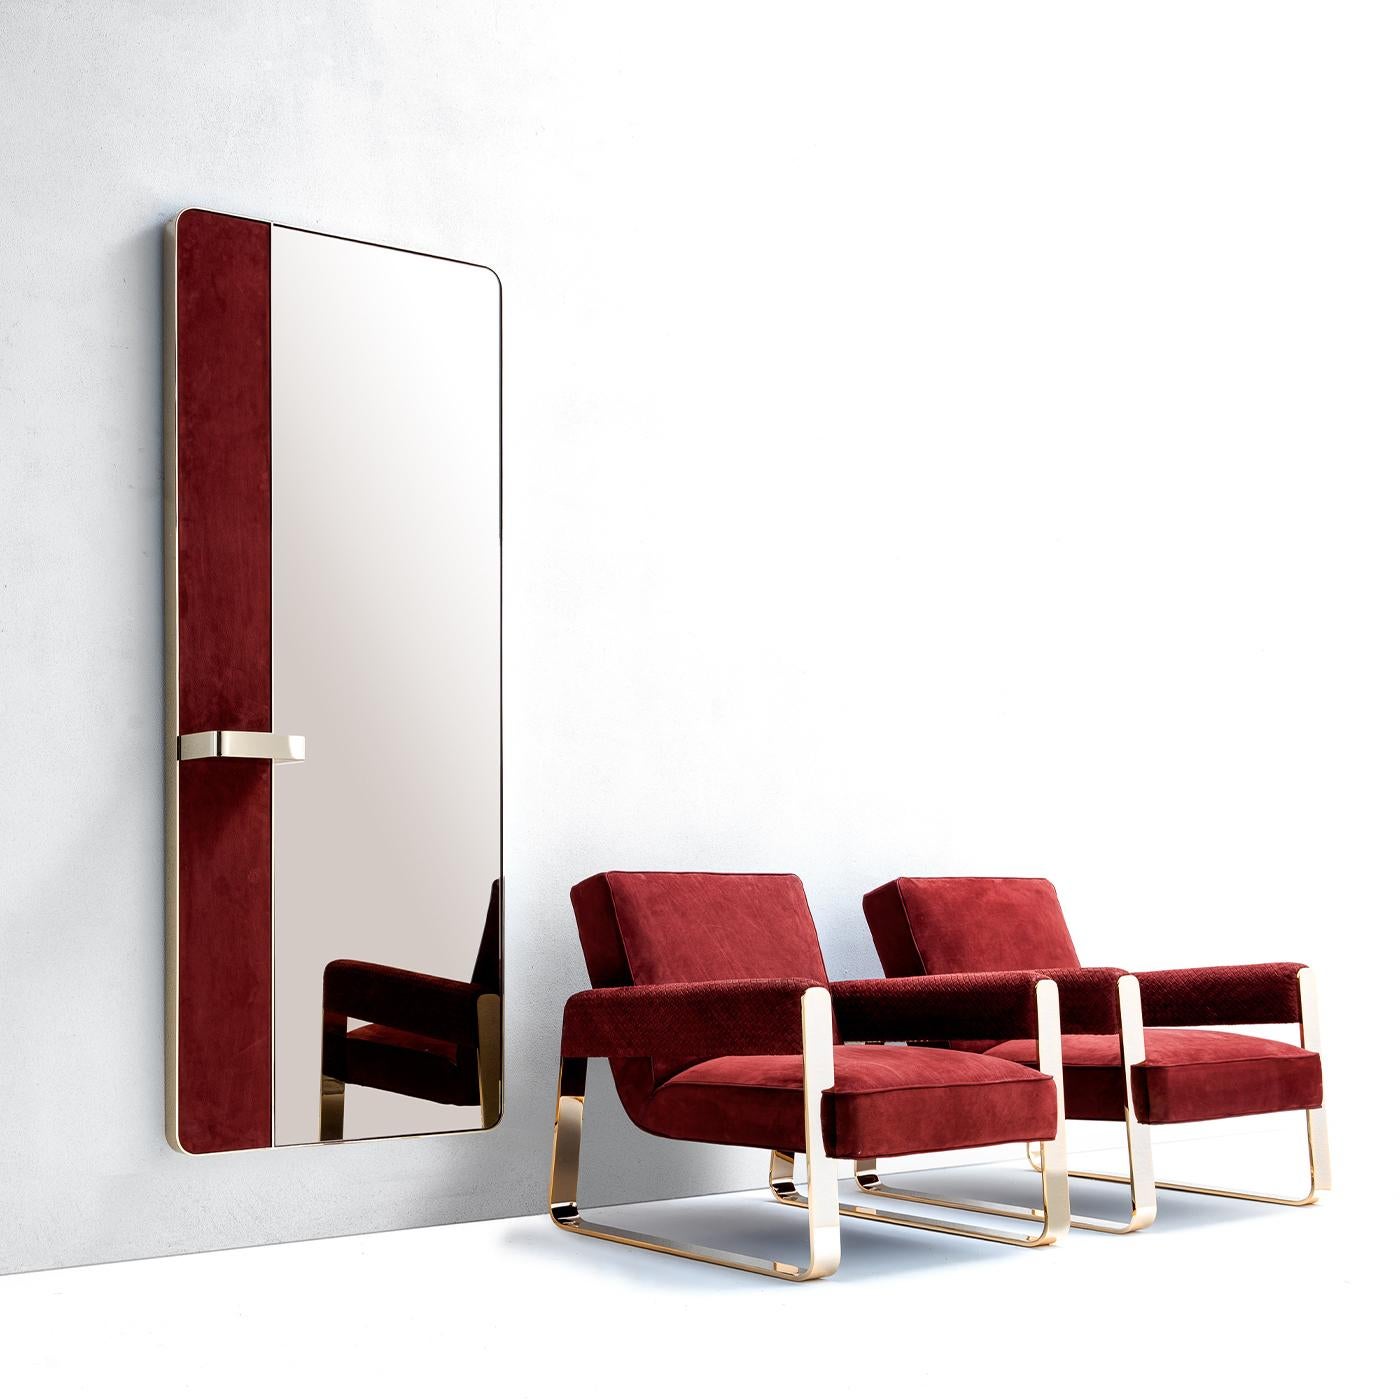 An elegant and refined piece of functional decor, this wall mirror by Andrea Pinori and Giorgio Balestri is distinguished for its delicate and sophisticated color palette. Showcasing a metal finish which recalls the gold-colored metal frame, it is